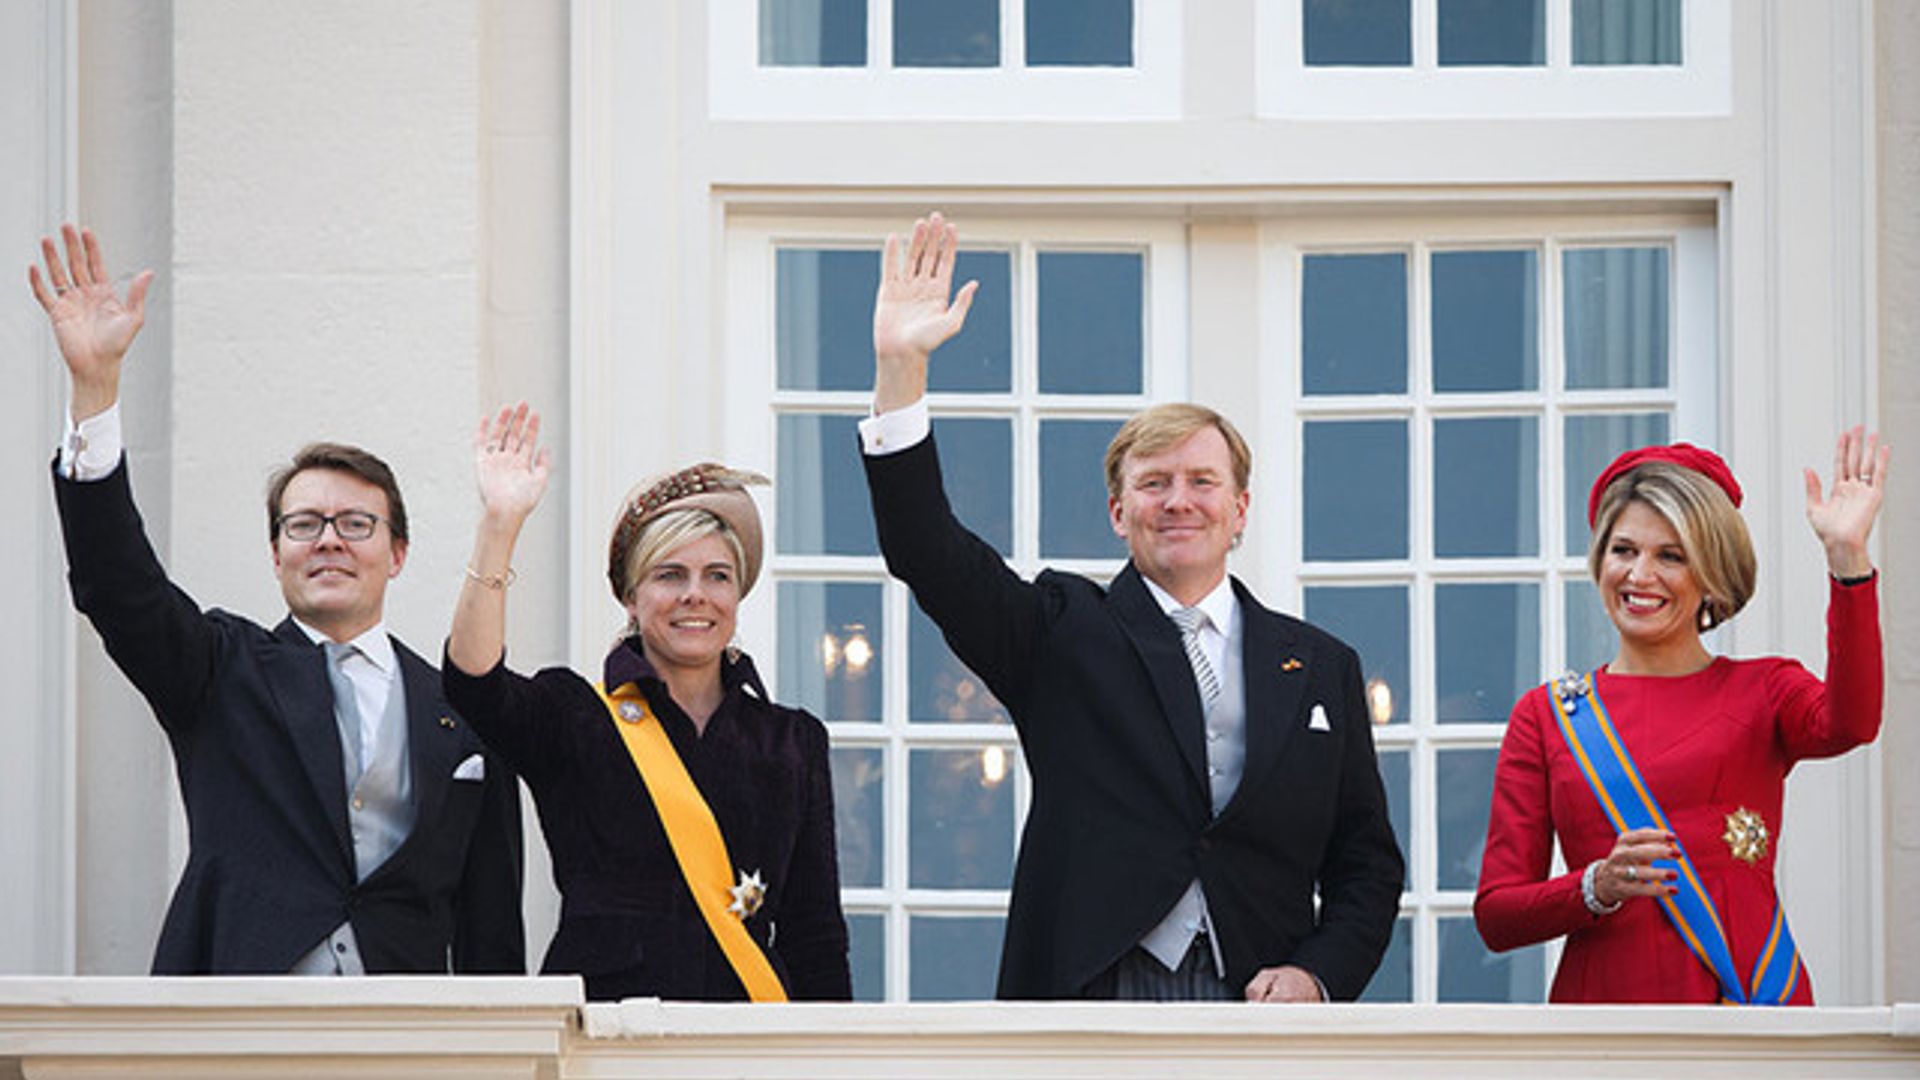 Queen Máxima looks radiant in red as she celebrates Prince's Day